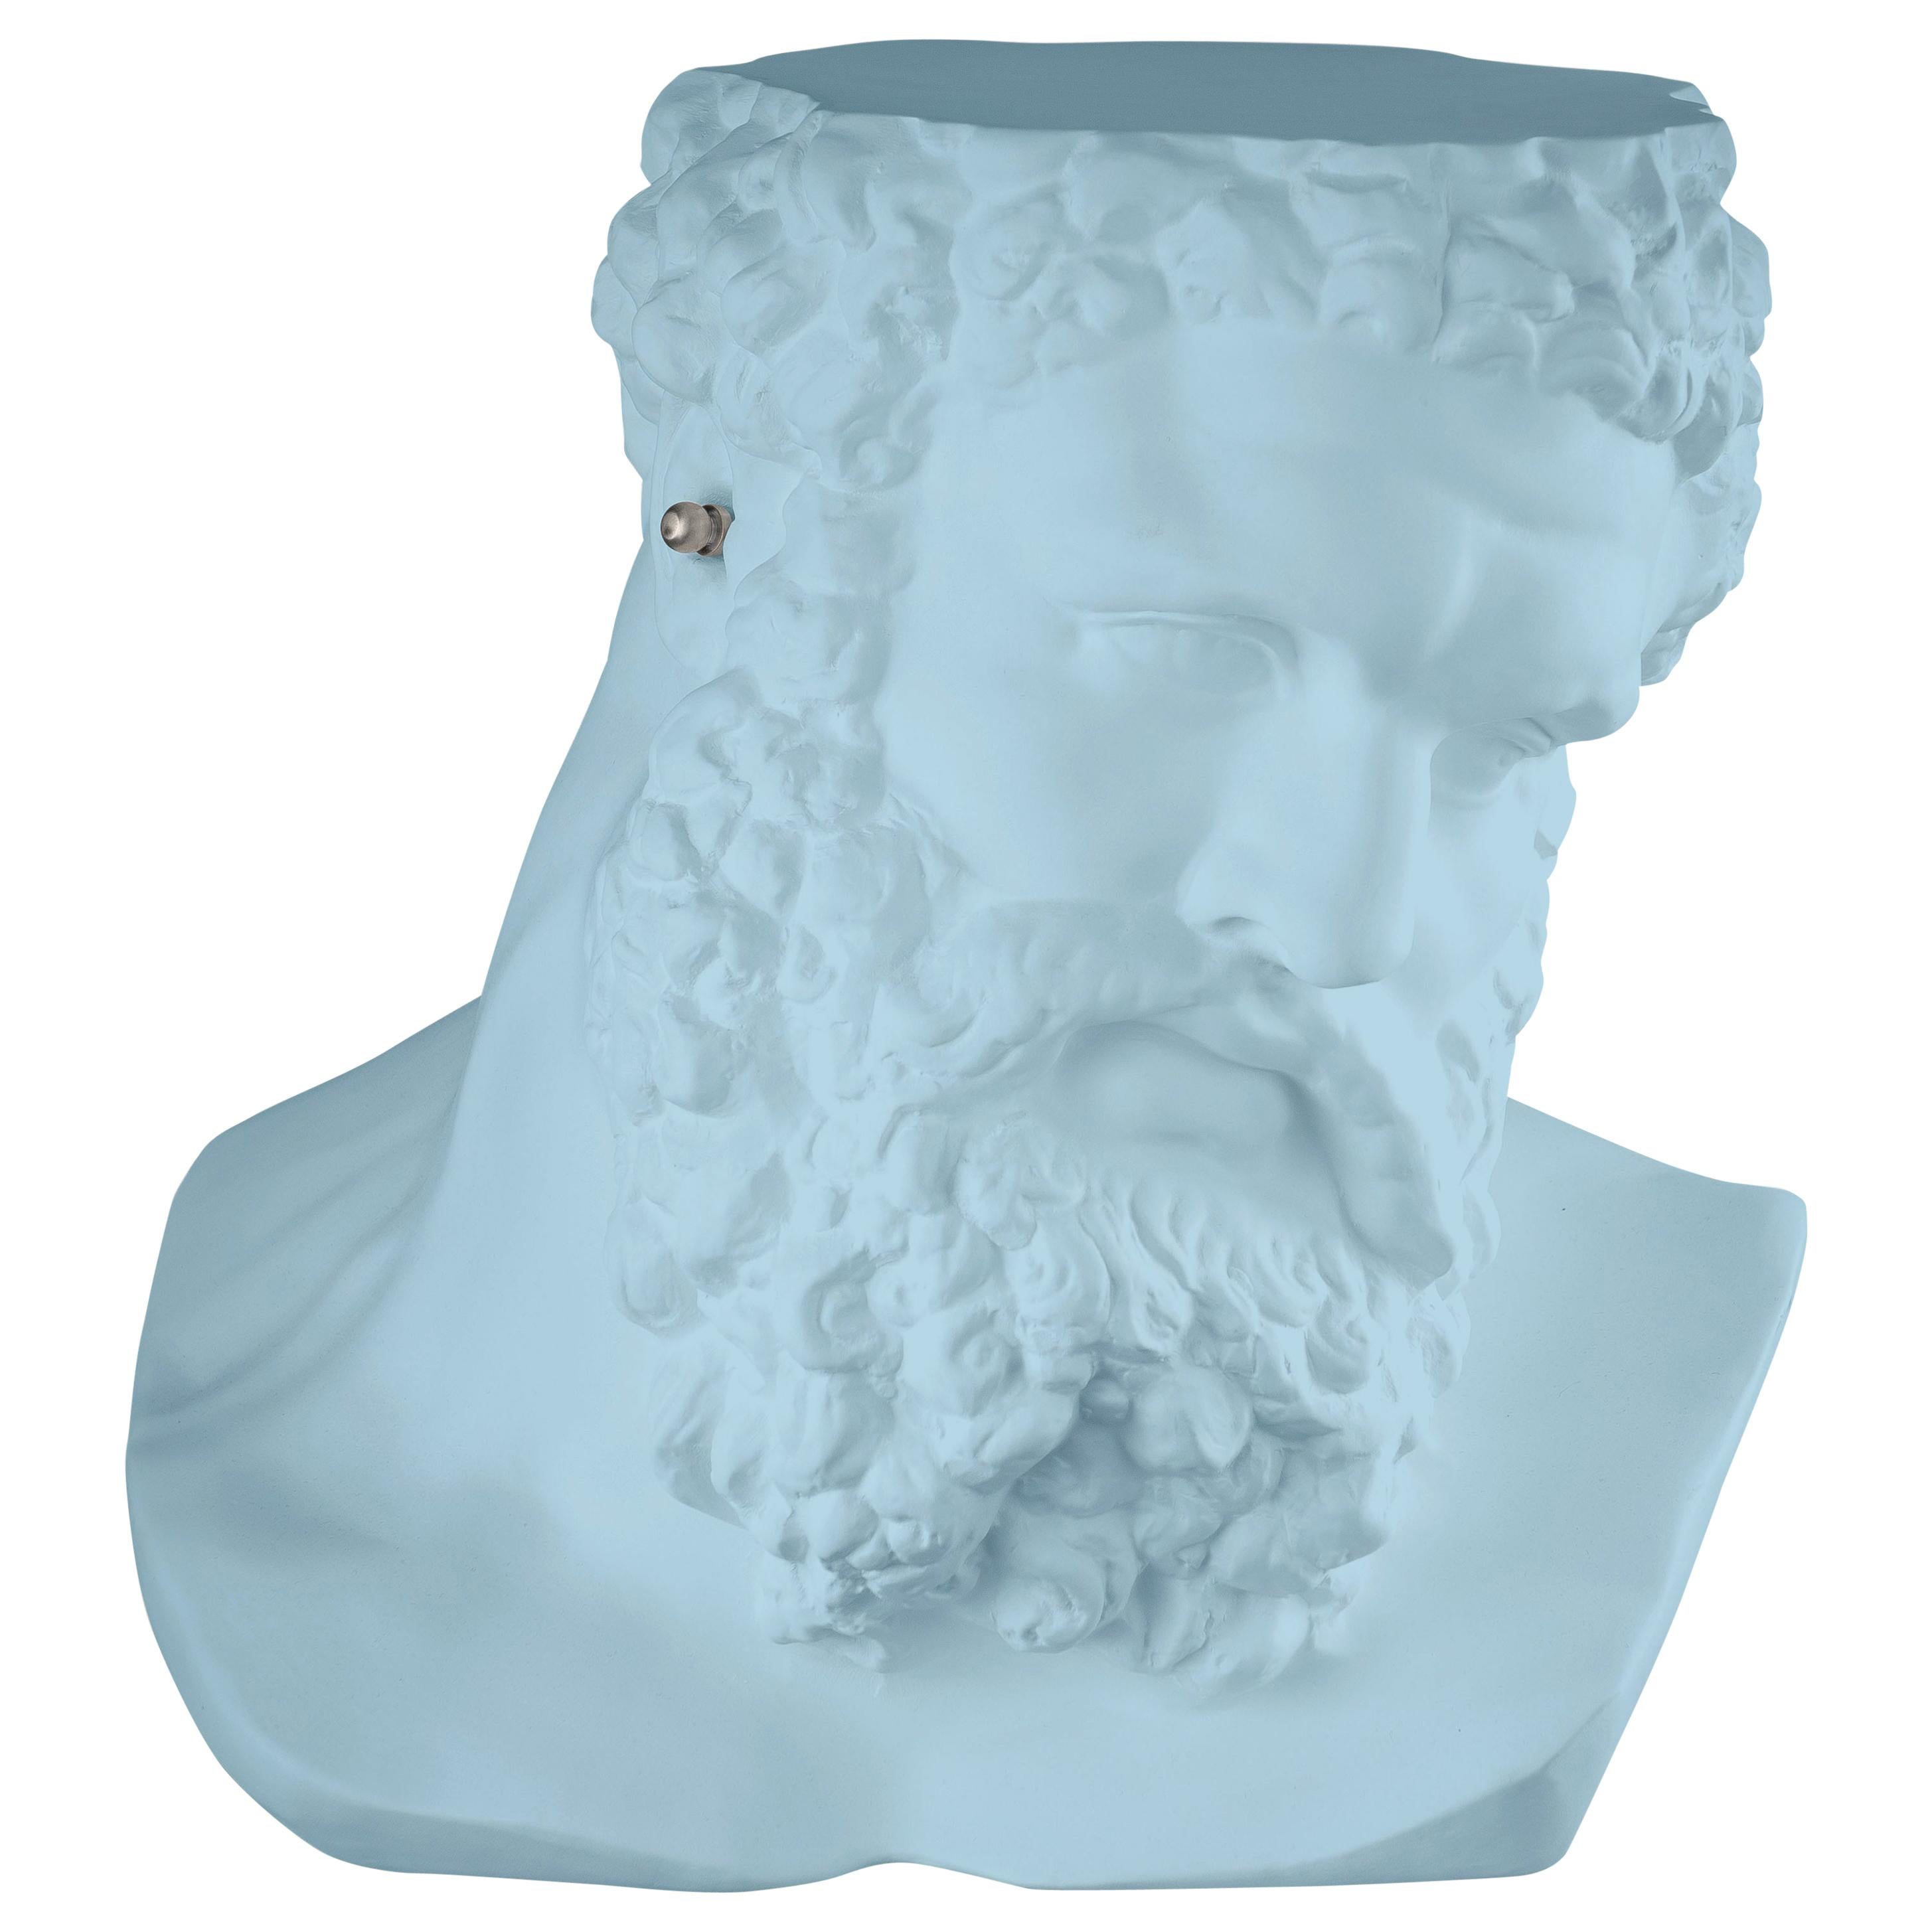 Bust Ercole"Don't Hear", Small Table/Sculpture, Ceramic, Purist Blue Color Italy